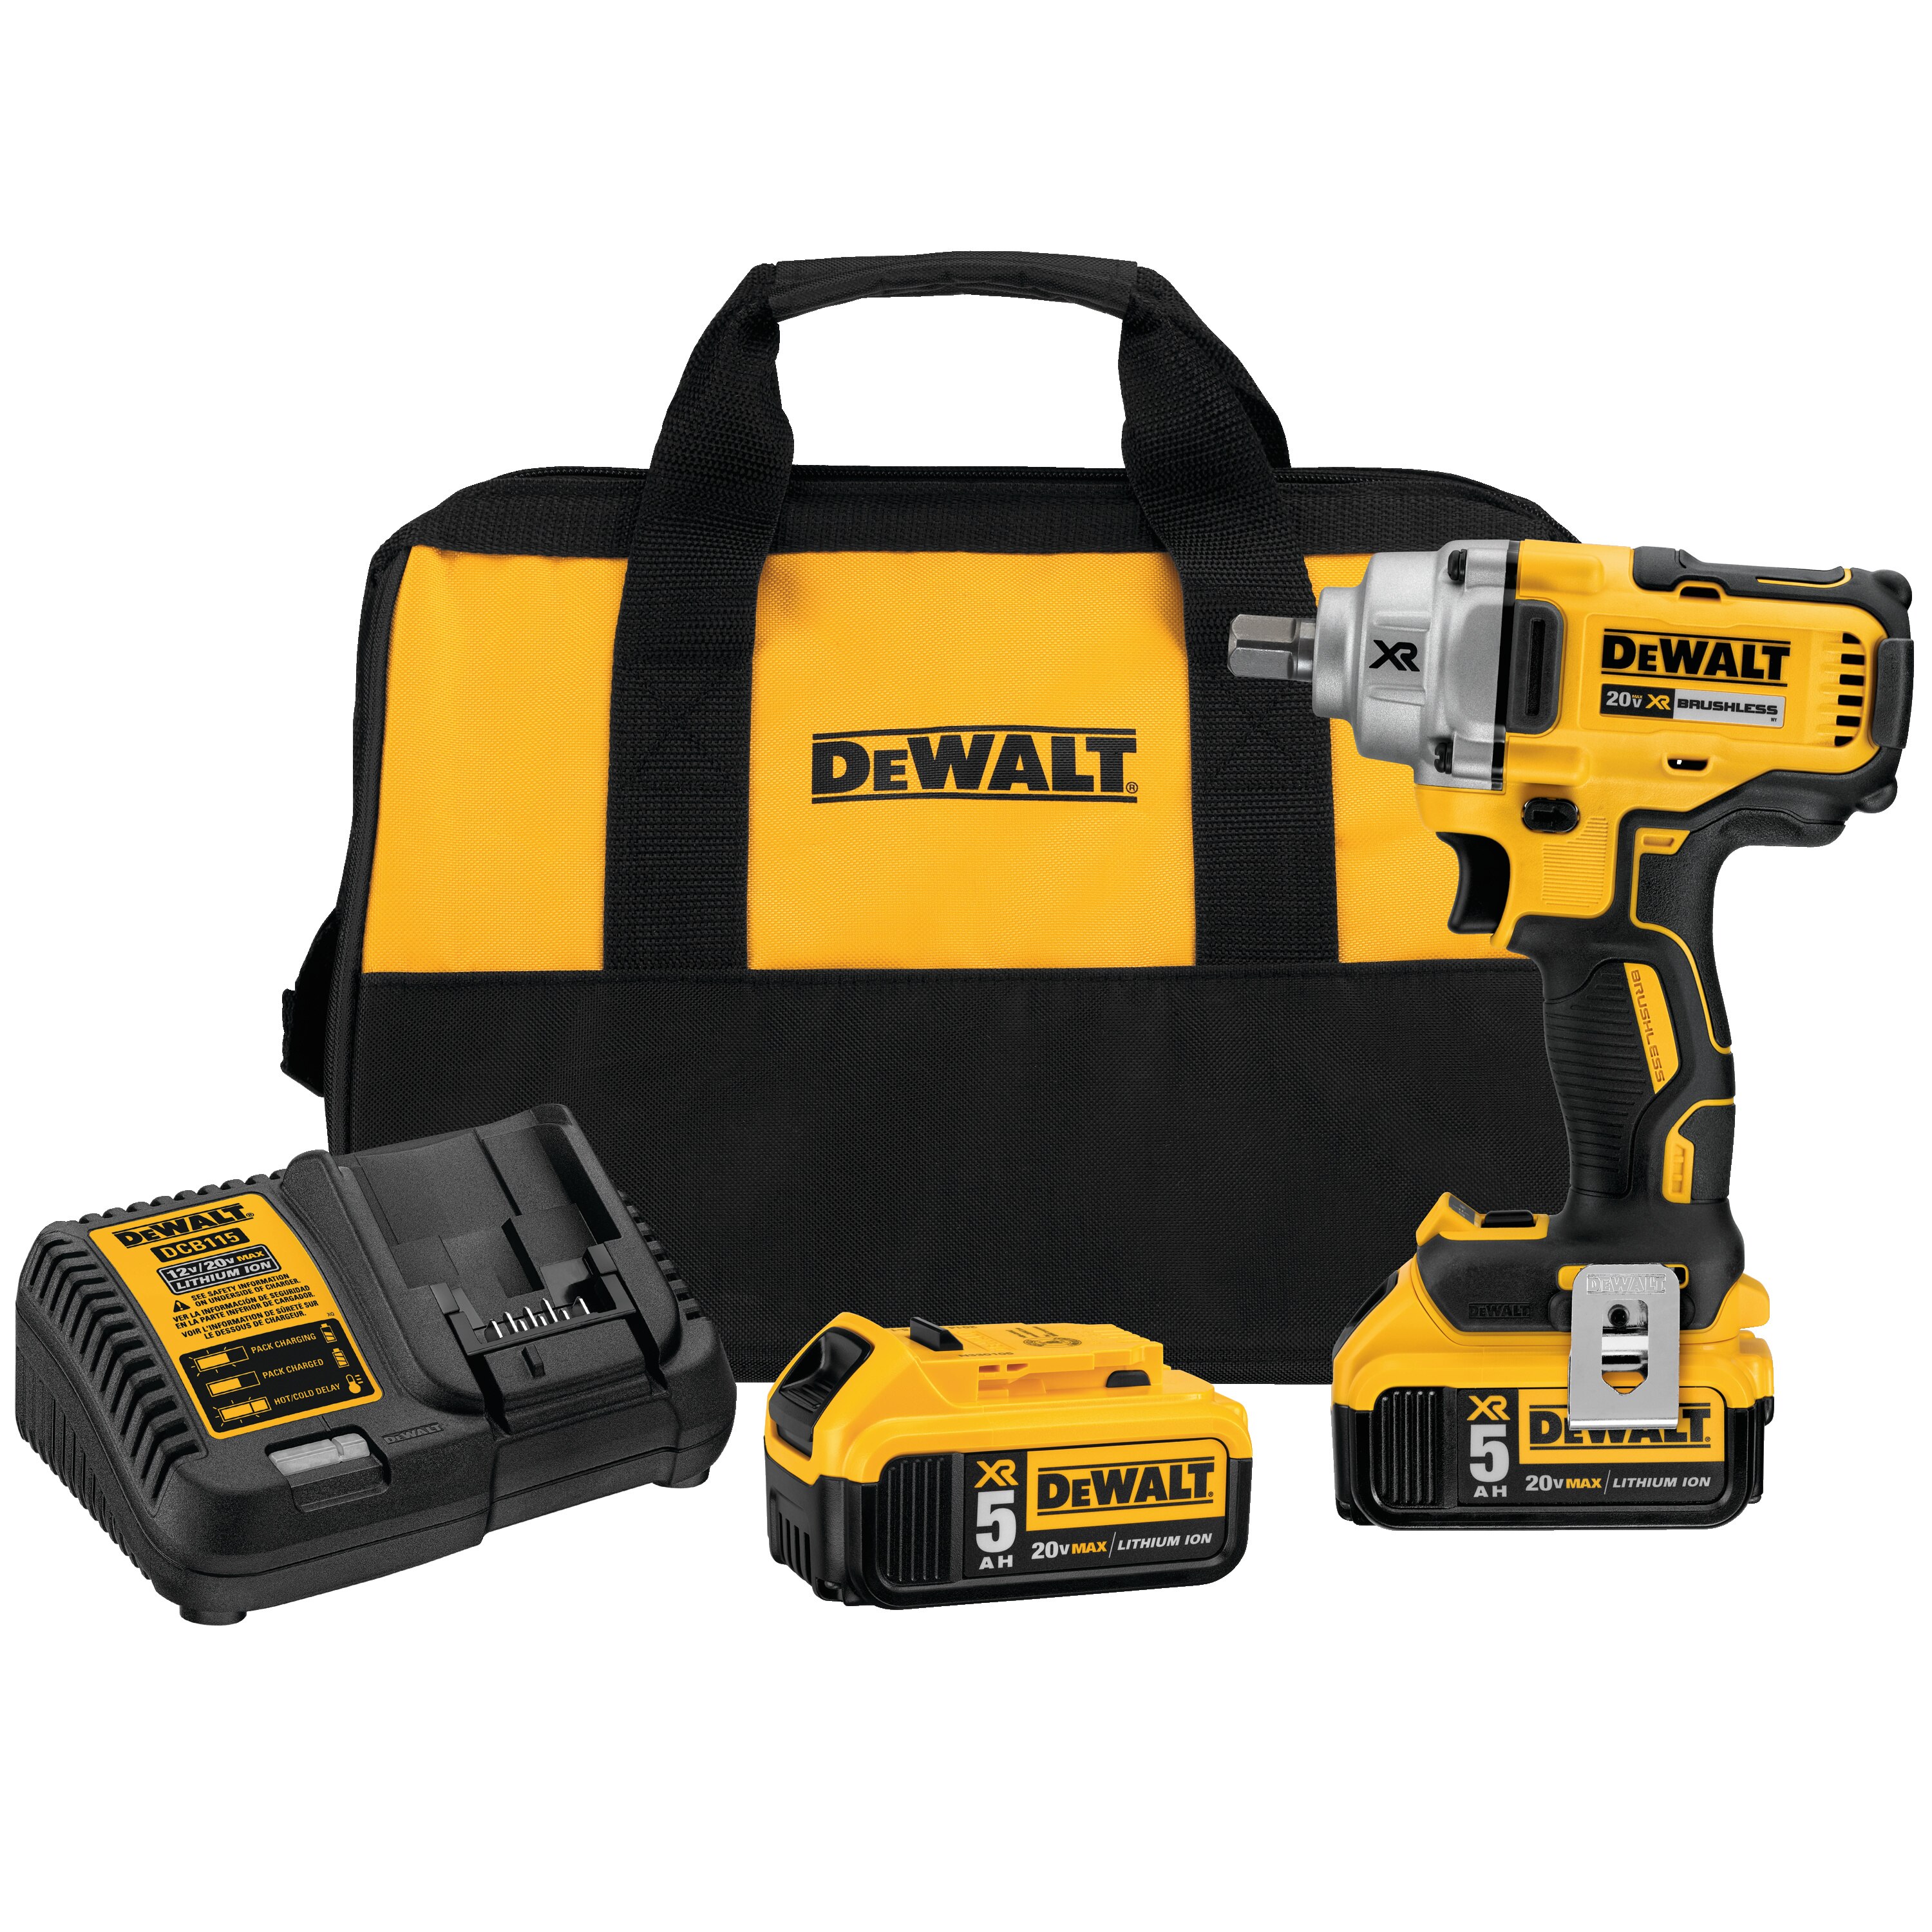 Dewalt DCF894P2 20V MAX* XR® 1/2 IN. Mid-Range Cordless Impact Wrench With Detent Pin Anvil Kit